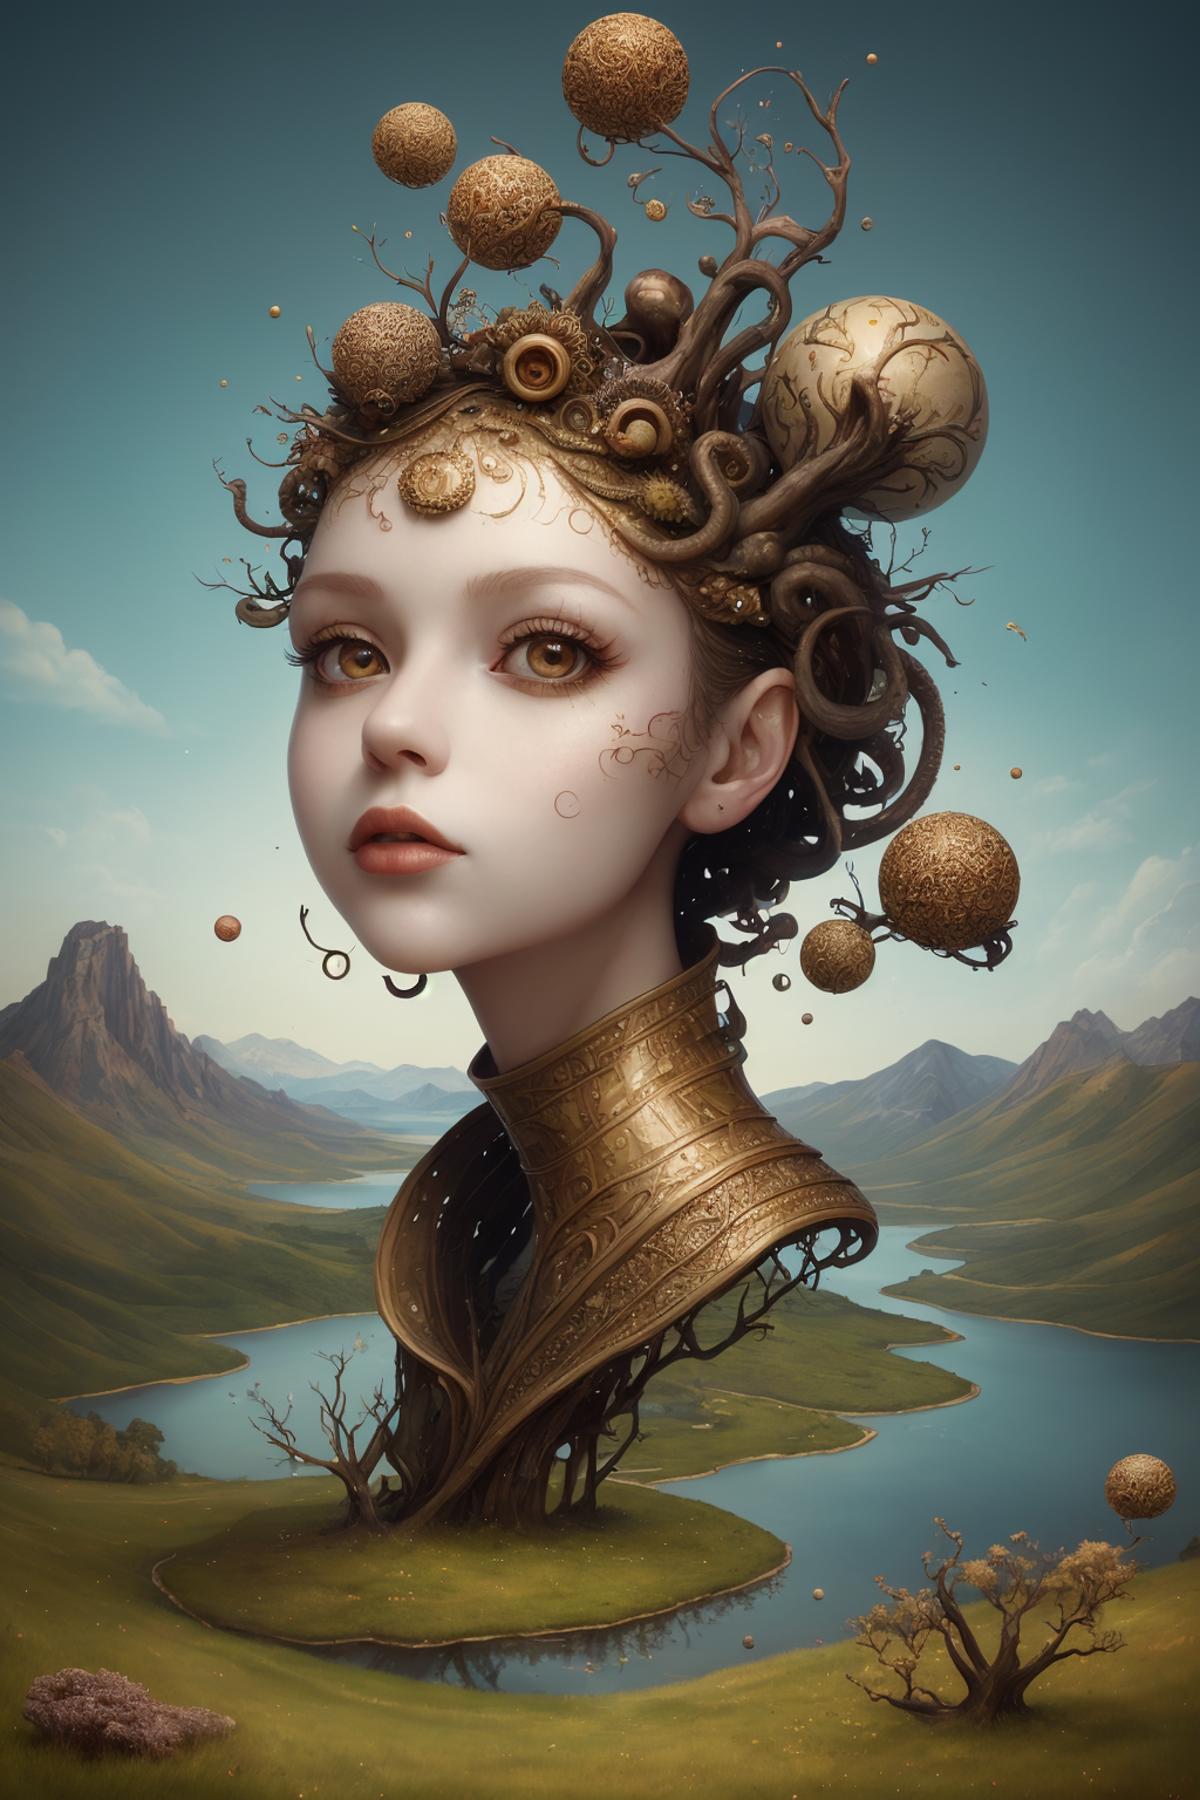 Surrealistic portraits in style of Naoto Hattori image by AIdollagency